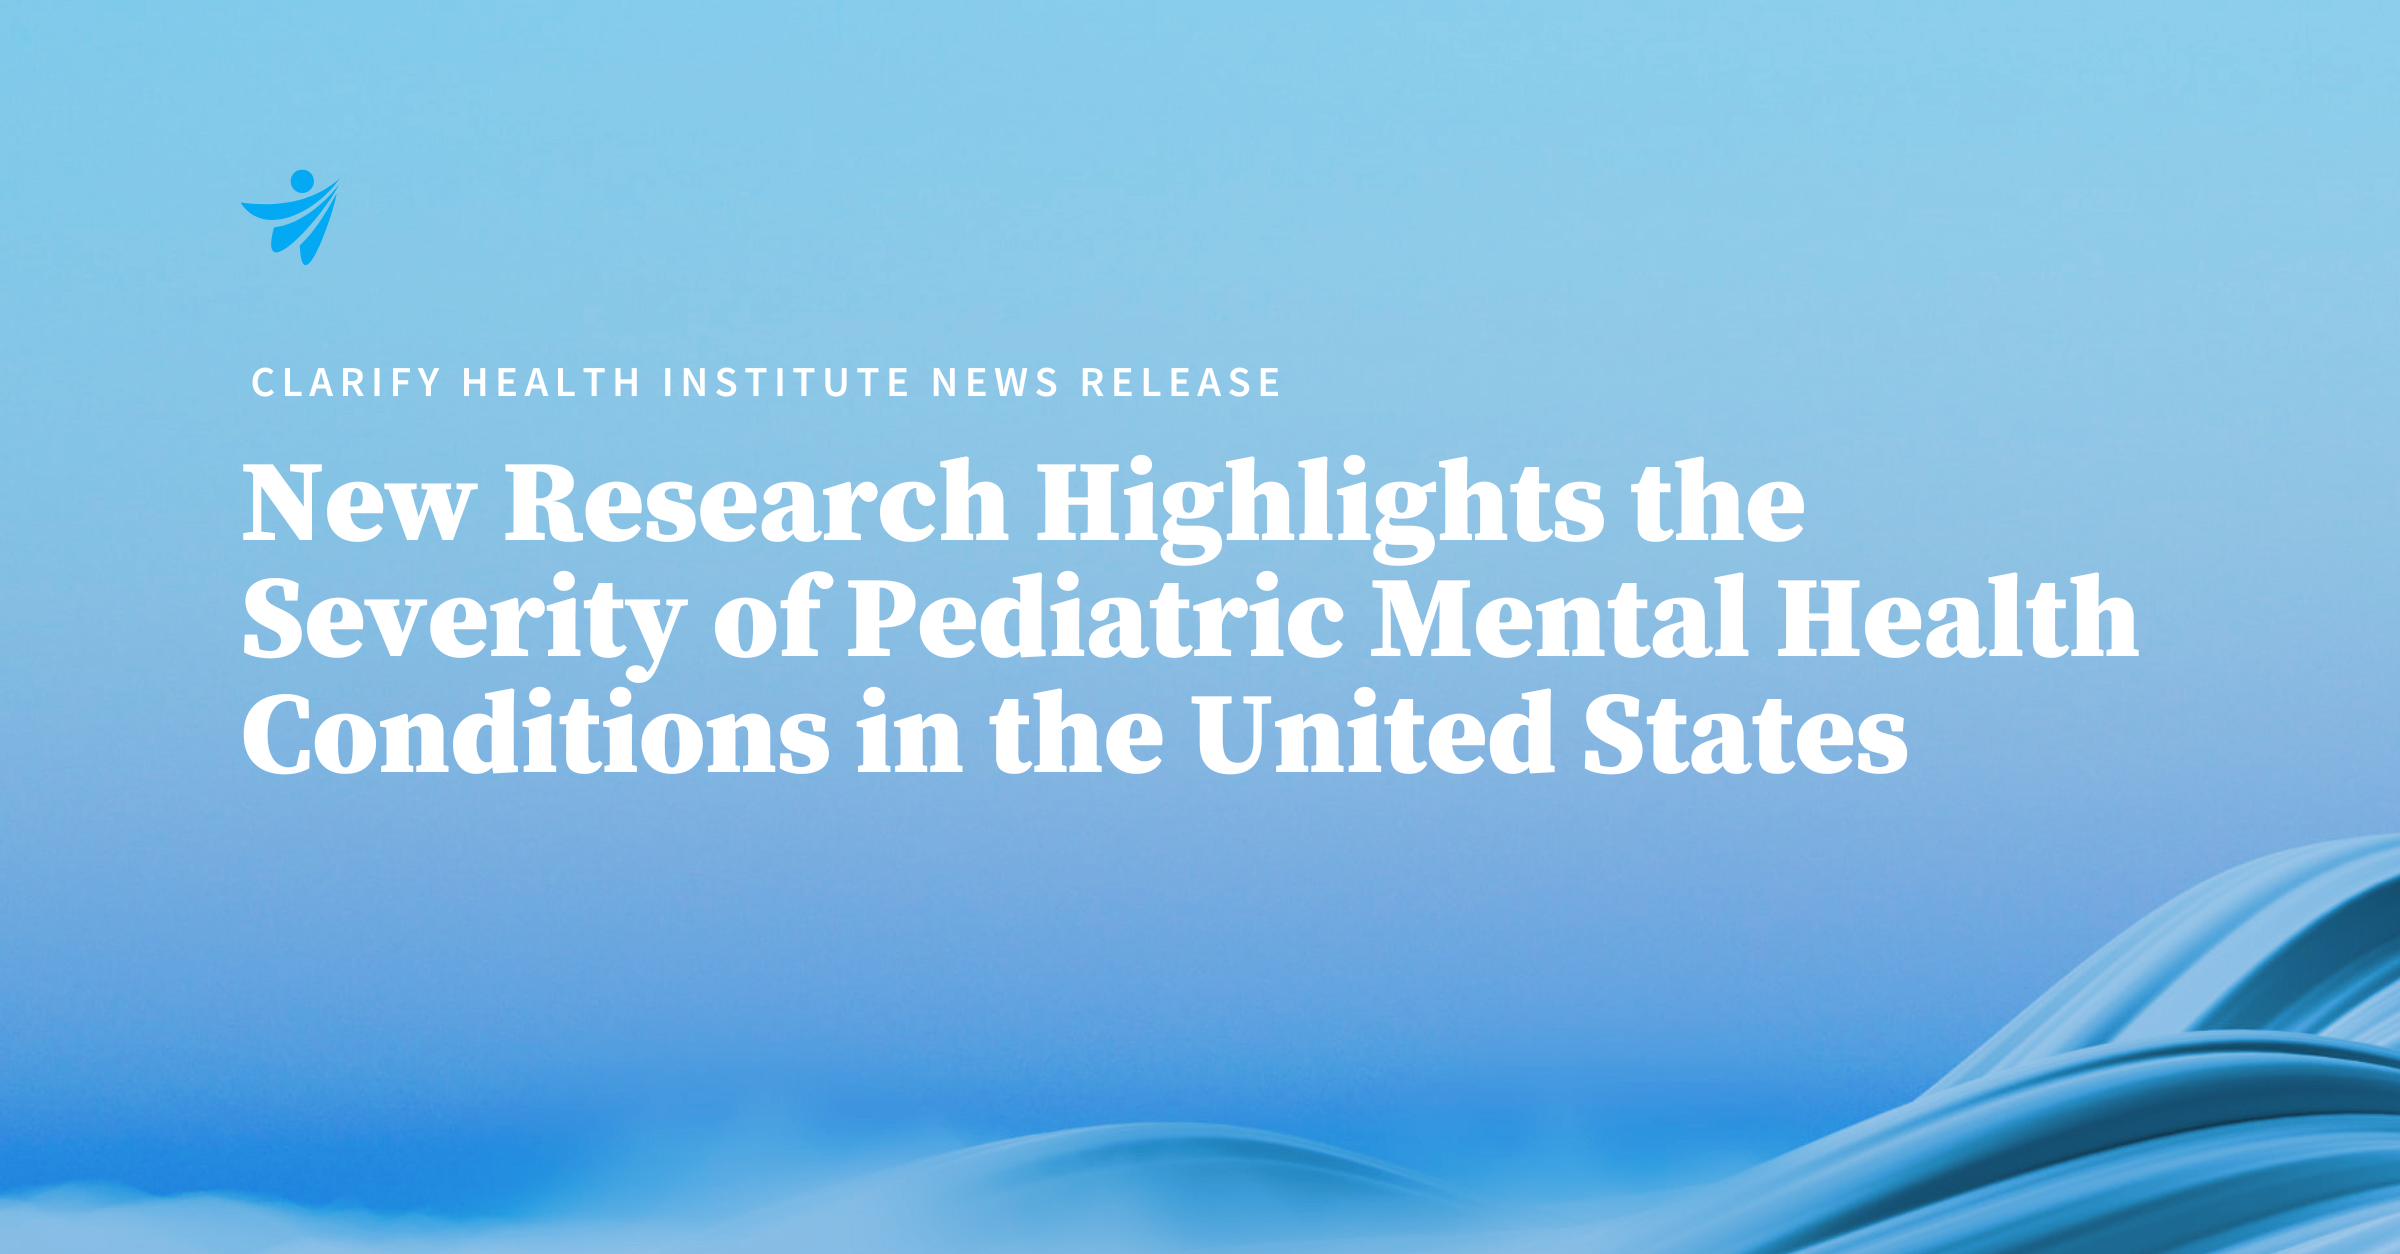 New research from the Clarify Health Institute Highlights the Severity of Pediatric Mental Health Conditions in the United States